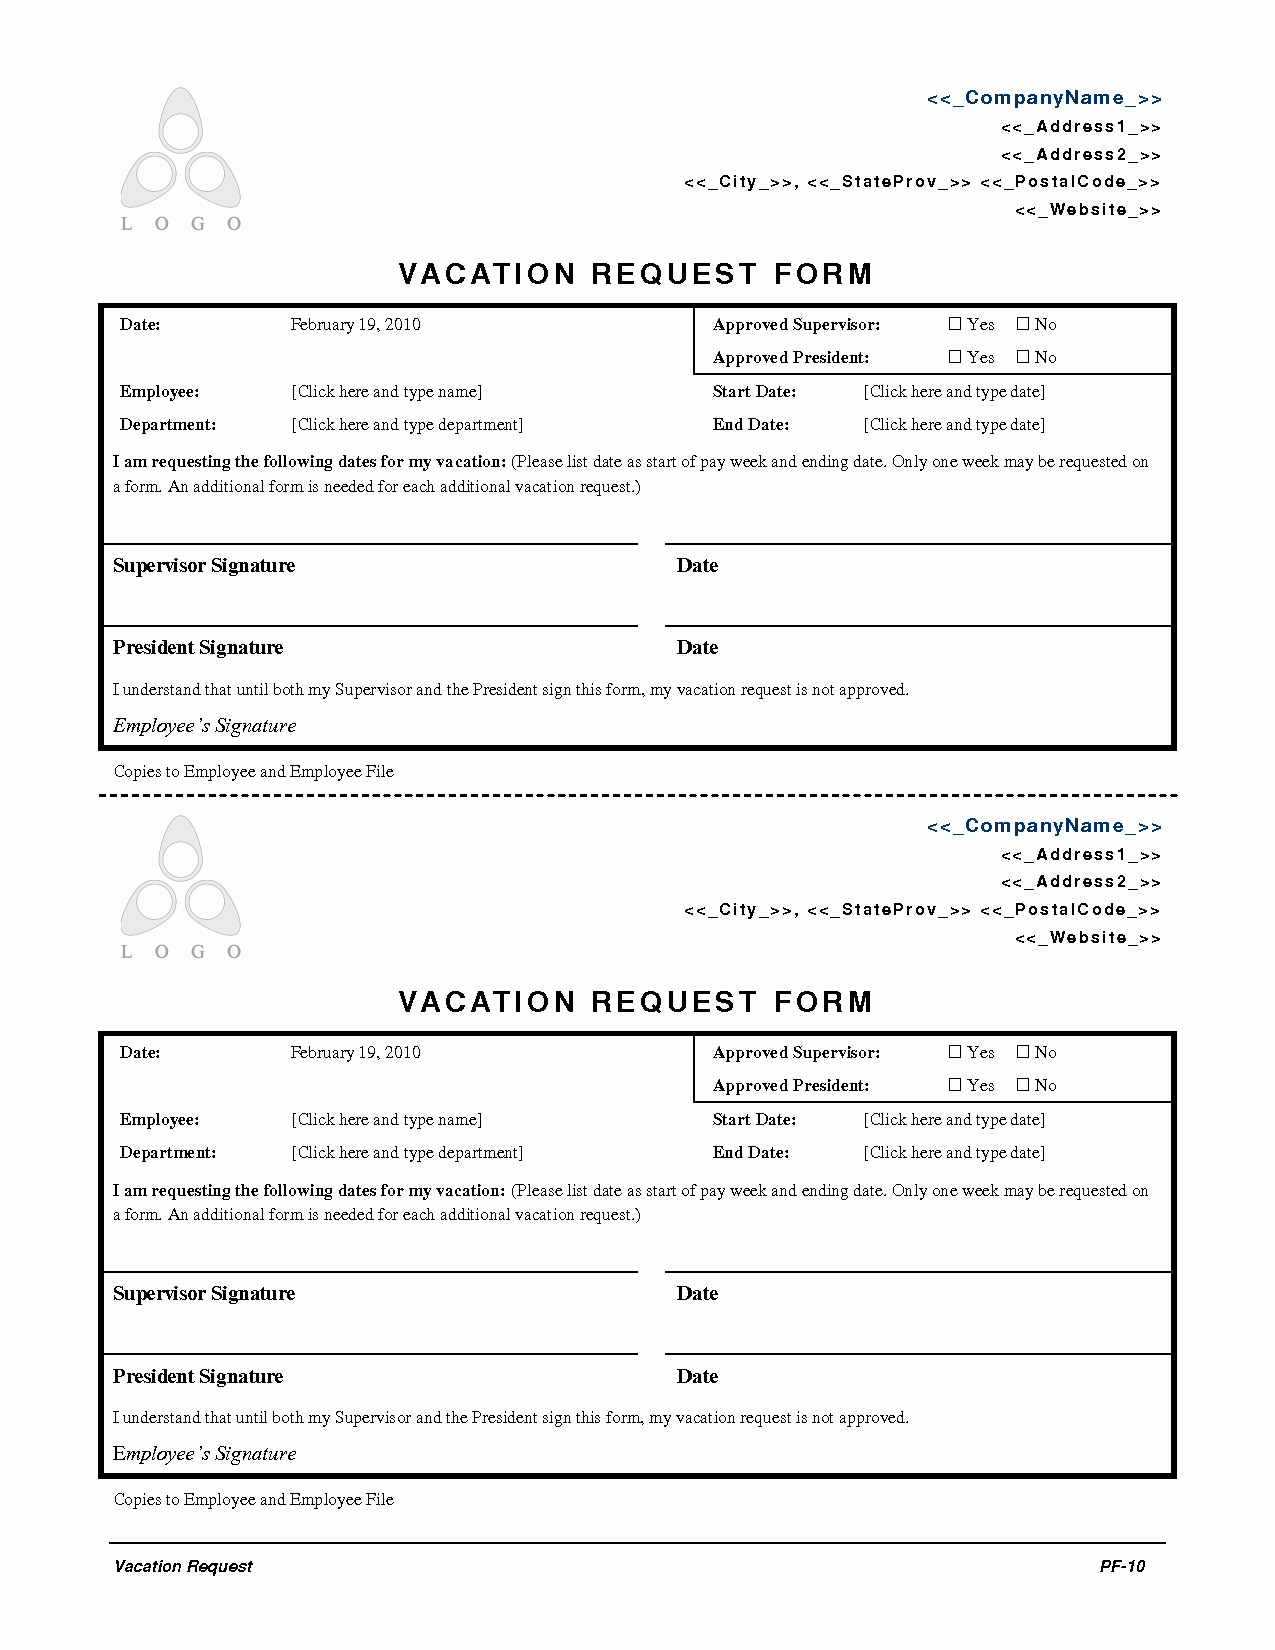 Vacation Request form Template Unique 2010 Employee Vacation Request form Employee forms Best